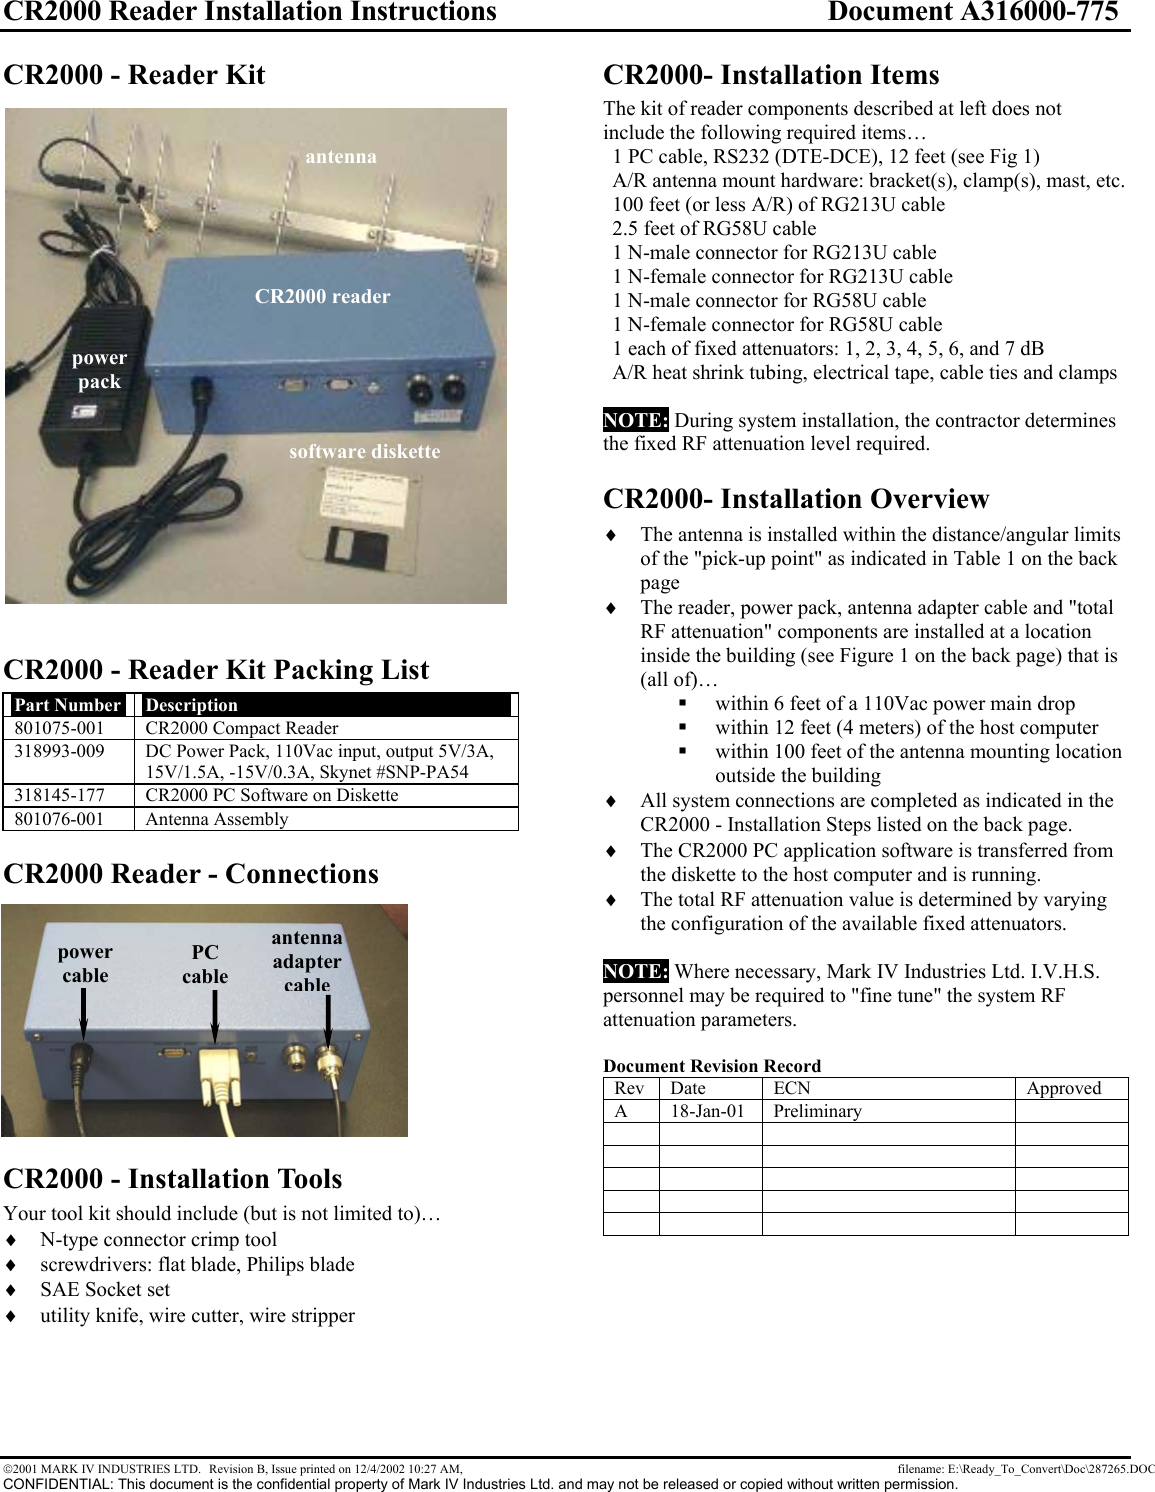 CR2000 Reader Installation Instructions  Document A316000-775 2001 MARK IV INDUSTRIES LTD.  Revision B, Issue printed on 12/4/2002 10:27 AM,    filename: E:\Ready_To_Convert\Doc\287265.DOC CONFIDENTIAL: This document is the confidential property of Mark IV Industries Ltd. and may not be released or copied without written permission. CR2000 - Reader Kit  CR2000 - Reader Kit Packing List Part Number  Description 801075-001  CR2000 Compact Reader 318993-009  DC Power Pack, 110Vac input, output 5V/3A, 15V/1.5A, -15V/0.3A, Skynet #SNP-PA54 318145-177  CR2000 PC Software on Diskette 801076-001 Antenna Assembly CR2000 Reader - Connections CR2000 - Installation Tools Your tool kit should include (but is not limited to)… ♦ N-type connector crimp tool ♦ screwdrivers: flat blade, Philips blade ♦ SAE Socket set ♦ utility knife, wire cutter, wire stripper CR2000- Installation Items The kit of reader components described at left does not include the following required items… 1 PC cable, RS232 (DTE-DCE), 12 feet (see Fig 1) A/R antenna mount hardware: bracket(s), clamp(s), mast, etc. 100 feet (or less A/R) of RG213U cable 2.5 feet of RG58U cable 1 N-male connector for RG213U cable 1 N-female connector for RG213U cable 1 N-male connector for RG58U cable 1 N-female connector for RG58U cable 1 each of fixed attenuators: 1, 2, 3, 4, 5, 6, and 7 dB A/R heat shrink tubing, electrical tape, cable ties and clamps  NOTE: During system installation, the contractor determines the fixed RF attenuation level required. CR2000- Installation Overview ♦ The antenna is installed within the distance/angular limits of the &quot;pick-up point&quot; as indicated in Table 1 on the back page ♦ The reader, power pack, antenna adapter cable and &quot;total RF attenuation&quot; components are installed at a location inside the building (see Figure 1 on the back page) that is (all of)…  within 6 feet of a 110Vac power main drop   within 12 feet (4 meters) of the host computer   within 100 feet of the antenna mounting location outside the building ♦ All system connections are completed as indicated in the CR2000 - Installation Steps listed on the back page. ♦ The CR2000 PC application software is transferred from the diskette to the host computer and is running. ♦ The total RF attenuation value is determined by varying the configuration of the available fixed attenuators.  NOTE: Where necessary, Mark IV Industries Ltd. I.V.H.S. personnel may be required to &quot;fine tune&quot; the system RF attenuation parameters.  Document Revision Record Rev Date  ECN  Approved A 18-Jan-01 Preliminary                                  power cable antenna  adapter cablePC cable CR2000 reader antenna software diskette power pack 